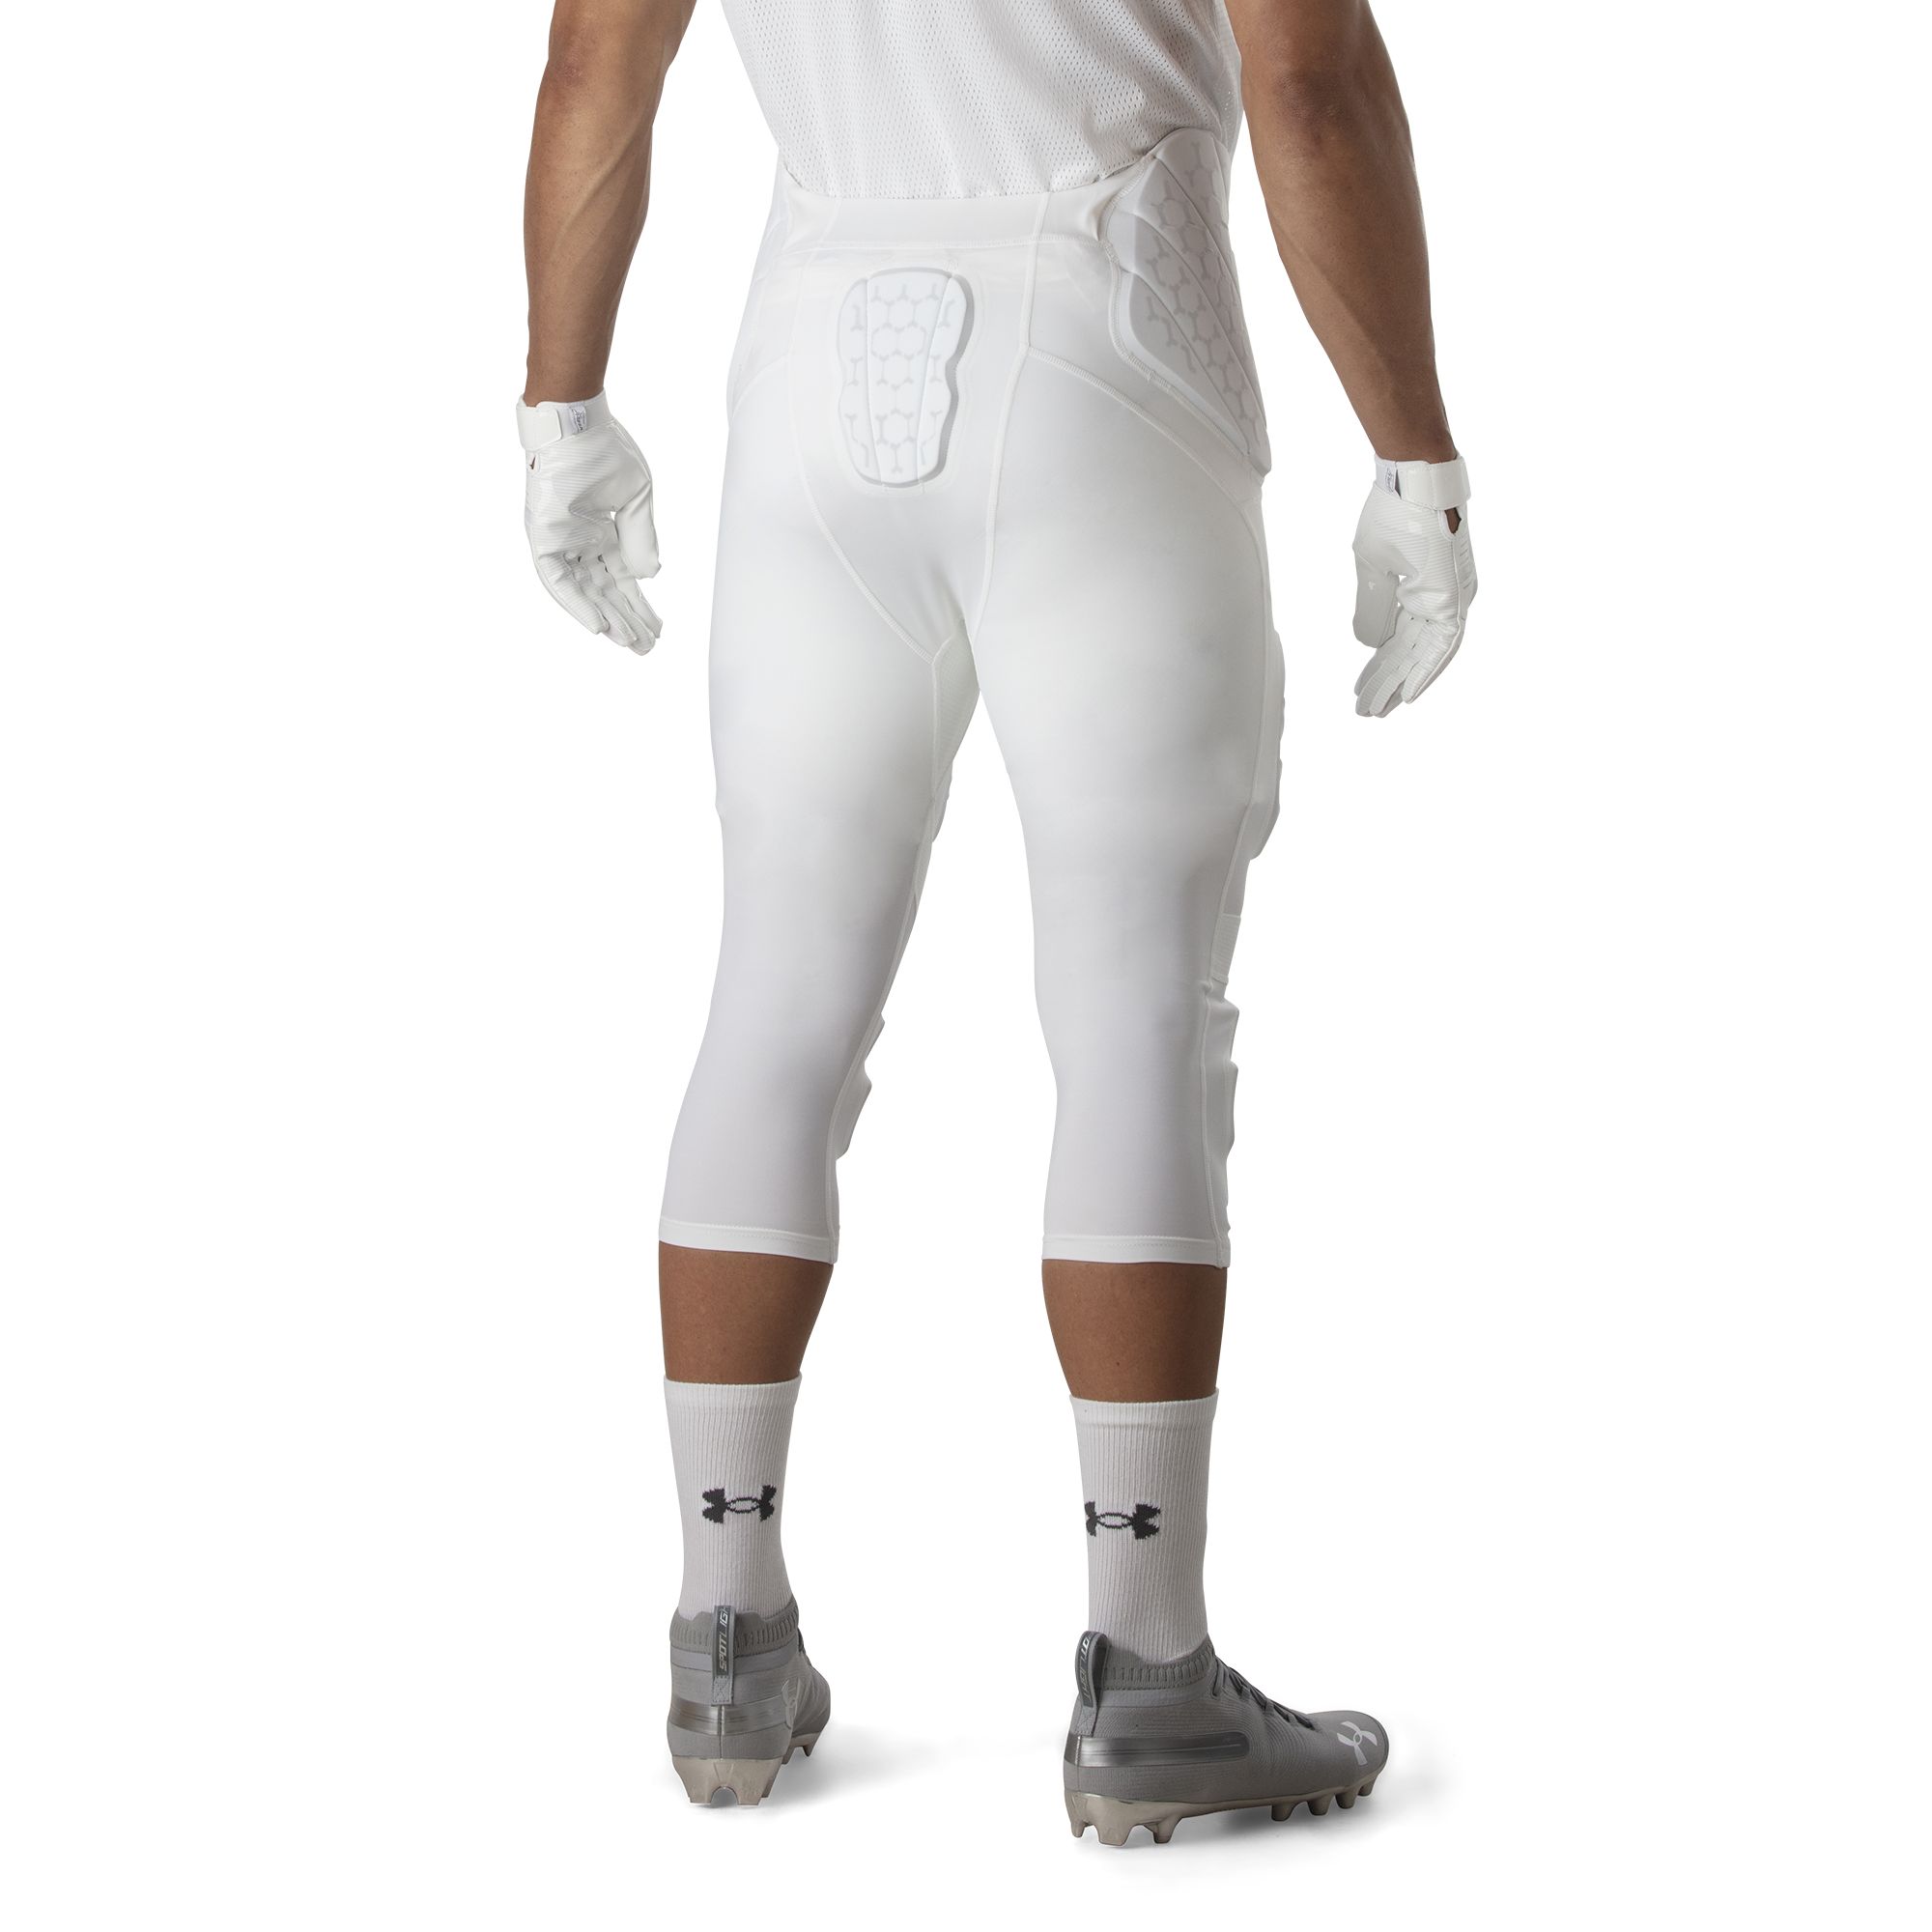 under armour youth football pants